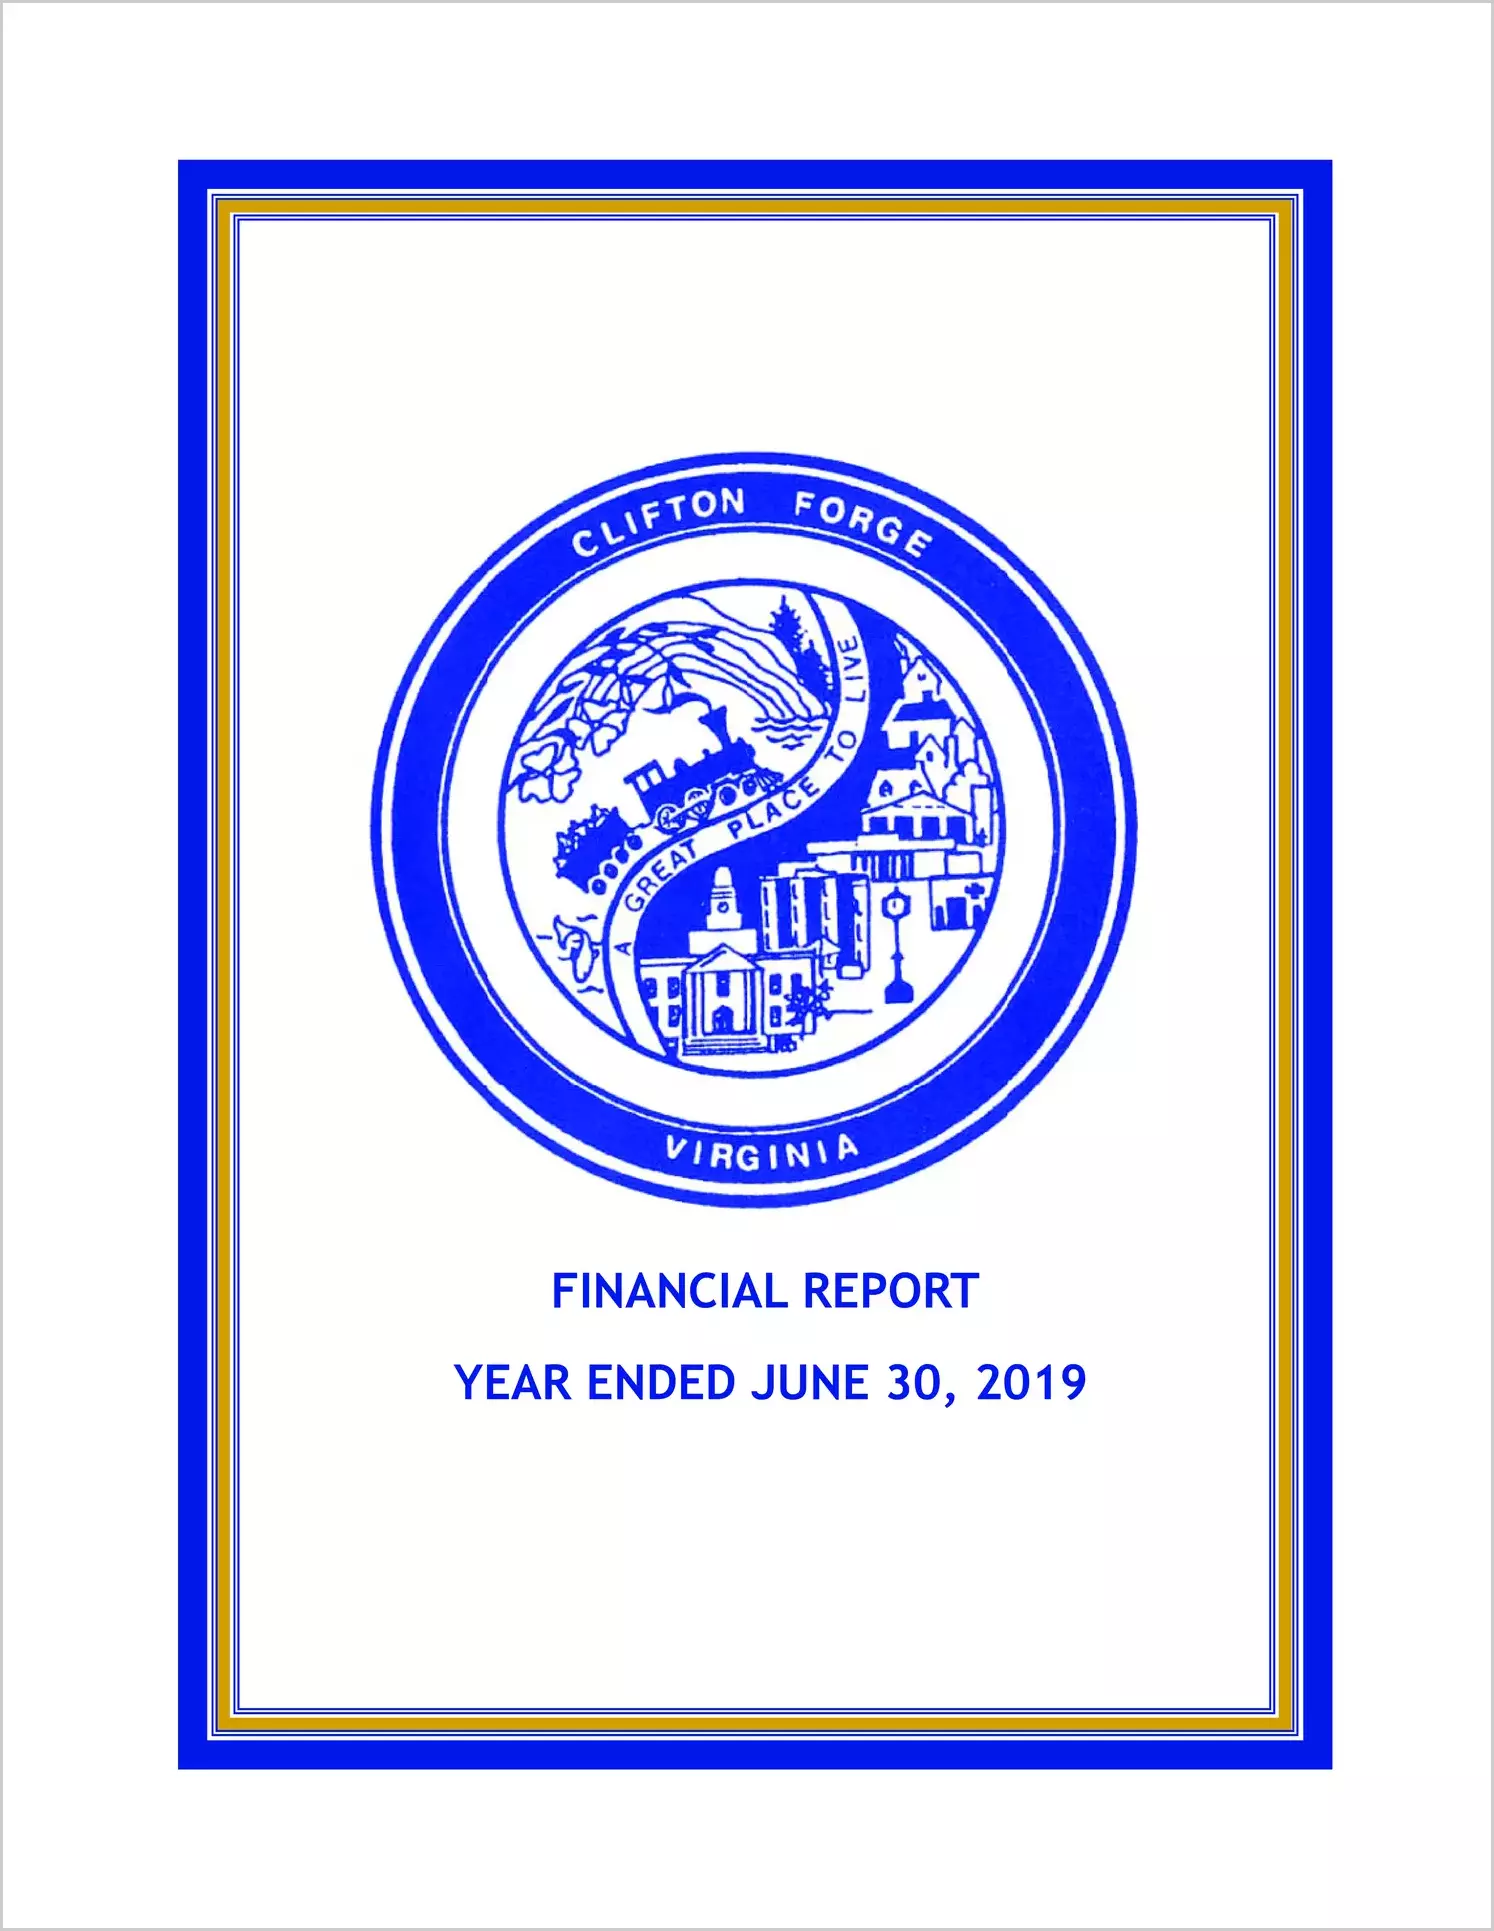 2019 Annual Financial Report for Town of Clifton Forge